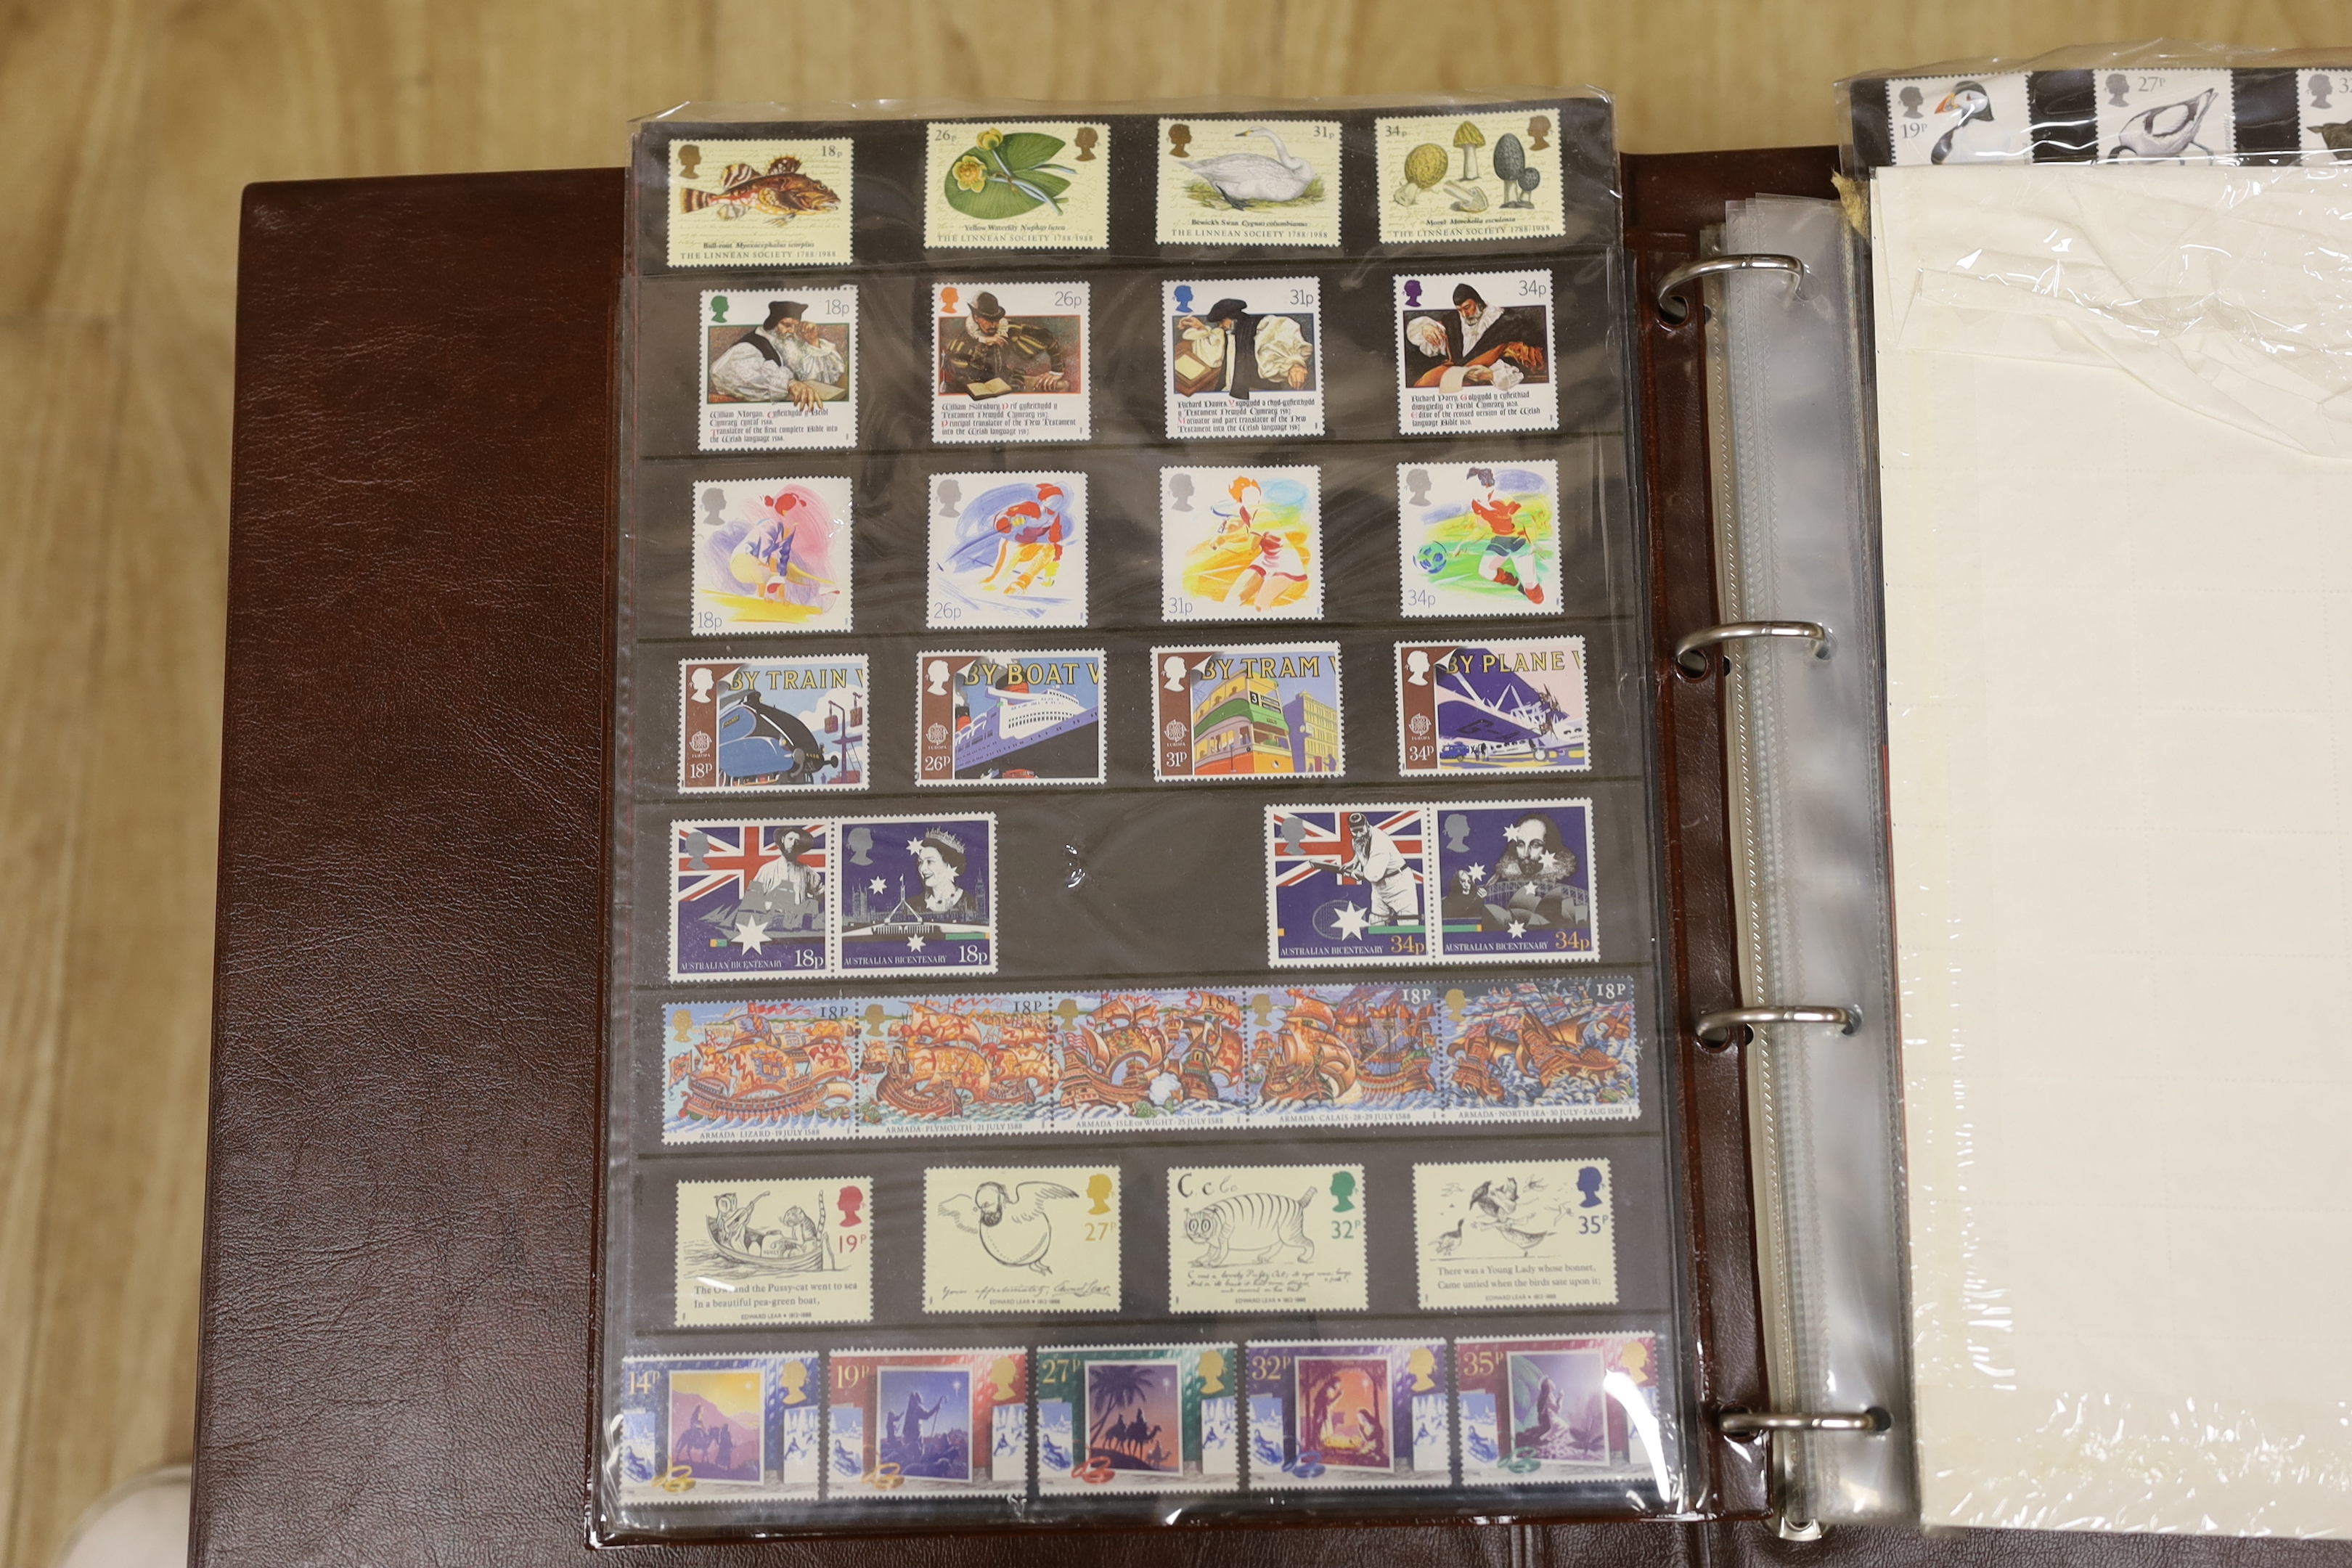 Royal Mail GB stamps - commemorative presentation packs in three albums, GB stamp album 1988-1991, twelve special stamps issues 1985-1991 (some duplicates) and five collector’s packs (one box)